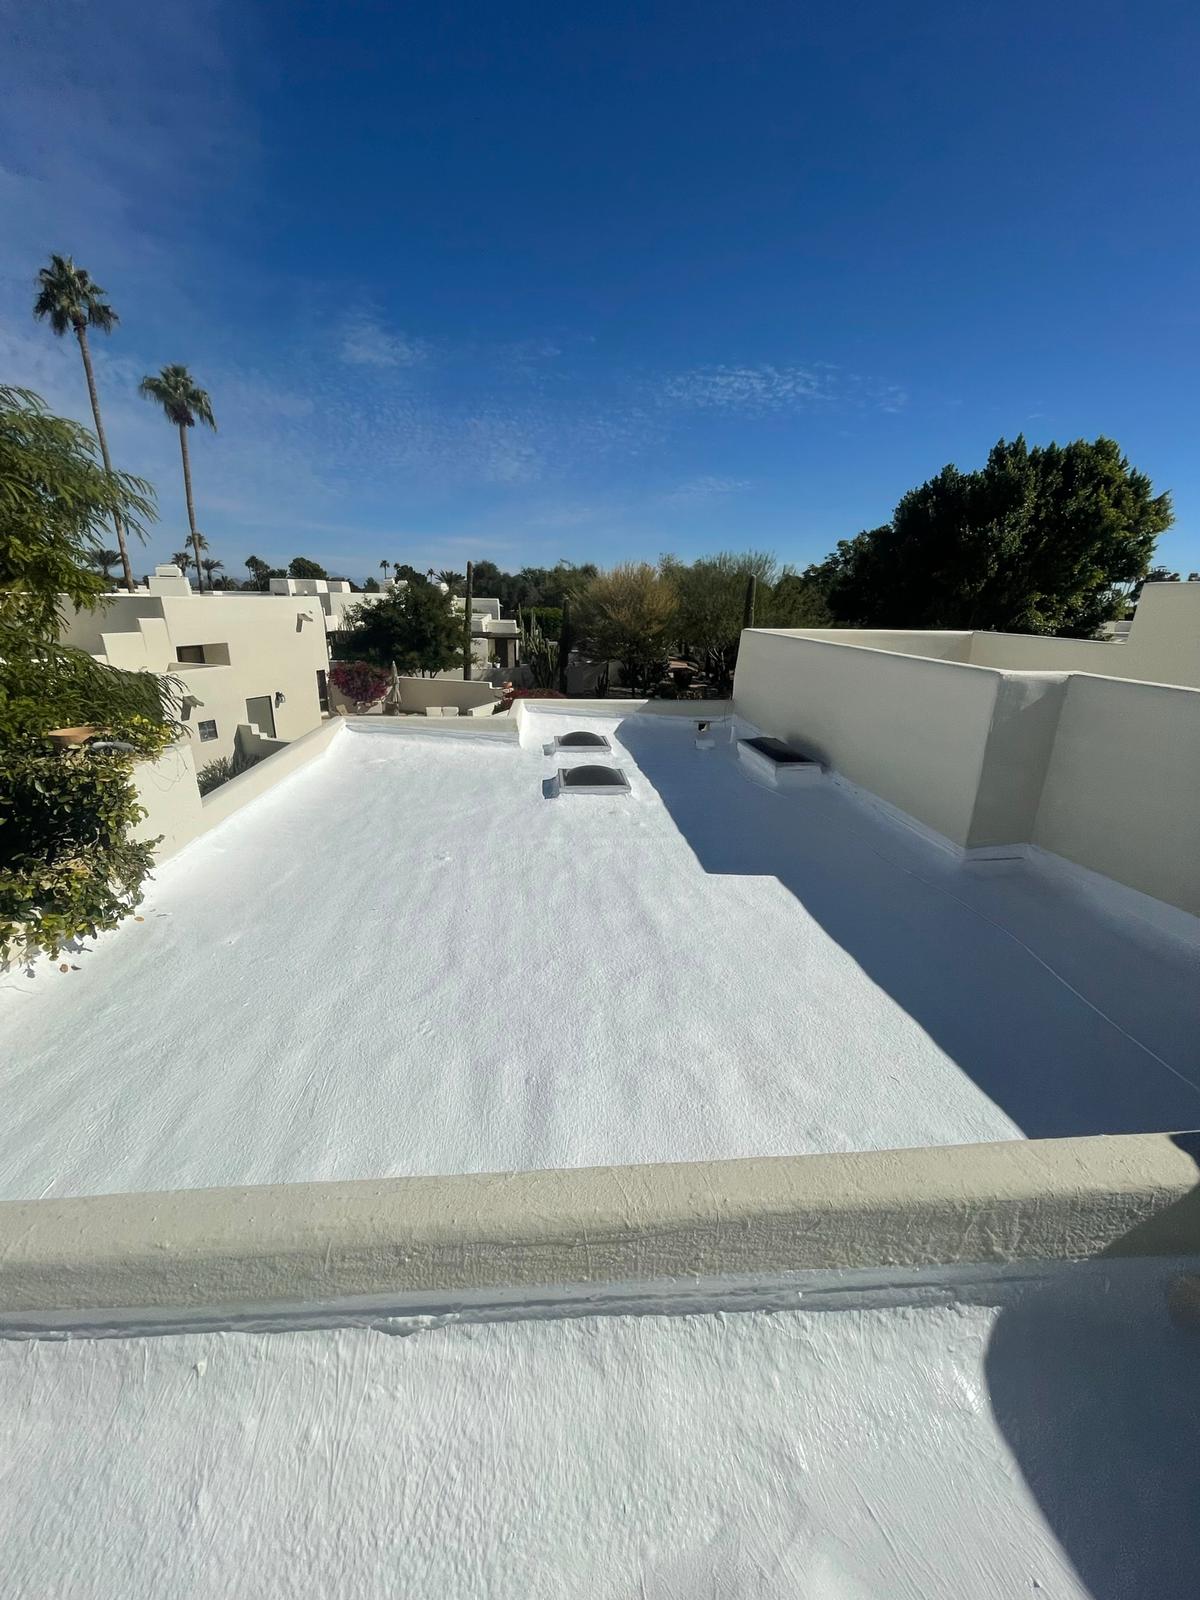 Overview of a newly coated and insulated roof in Desert Ridge, with spray foam application providing a seamless finish.